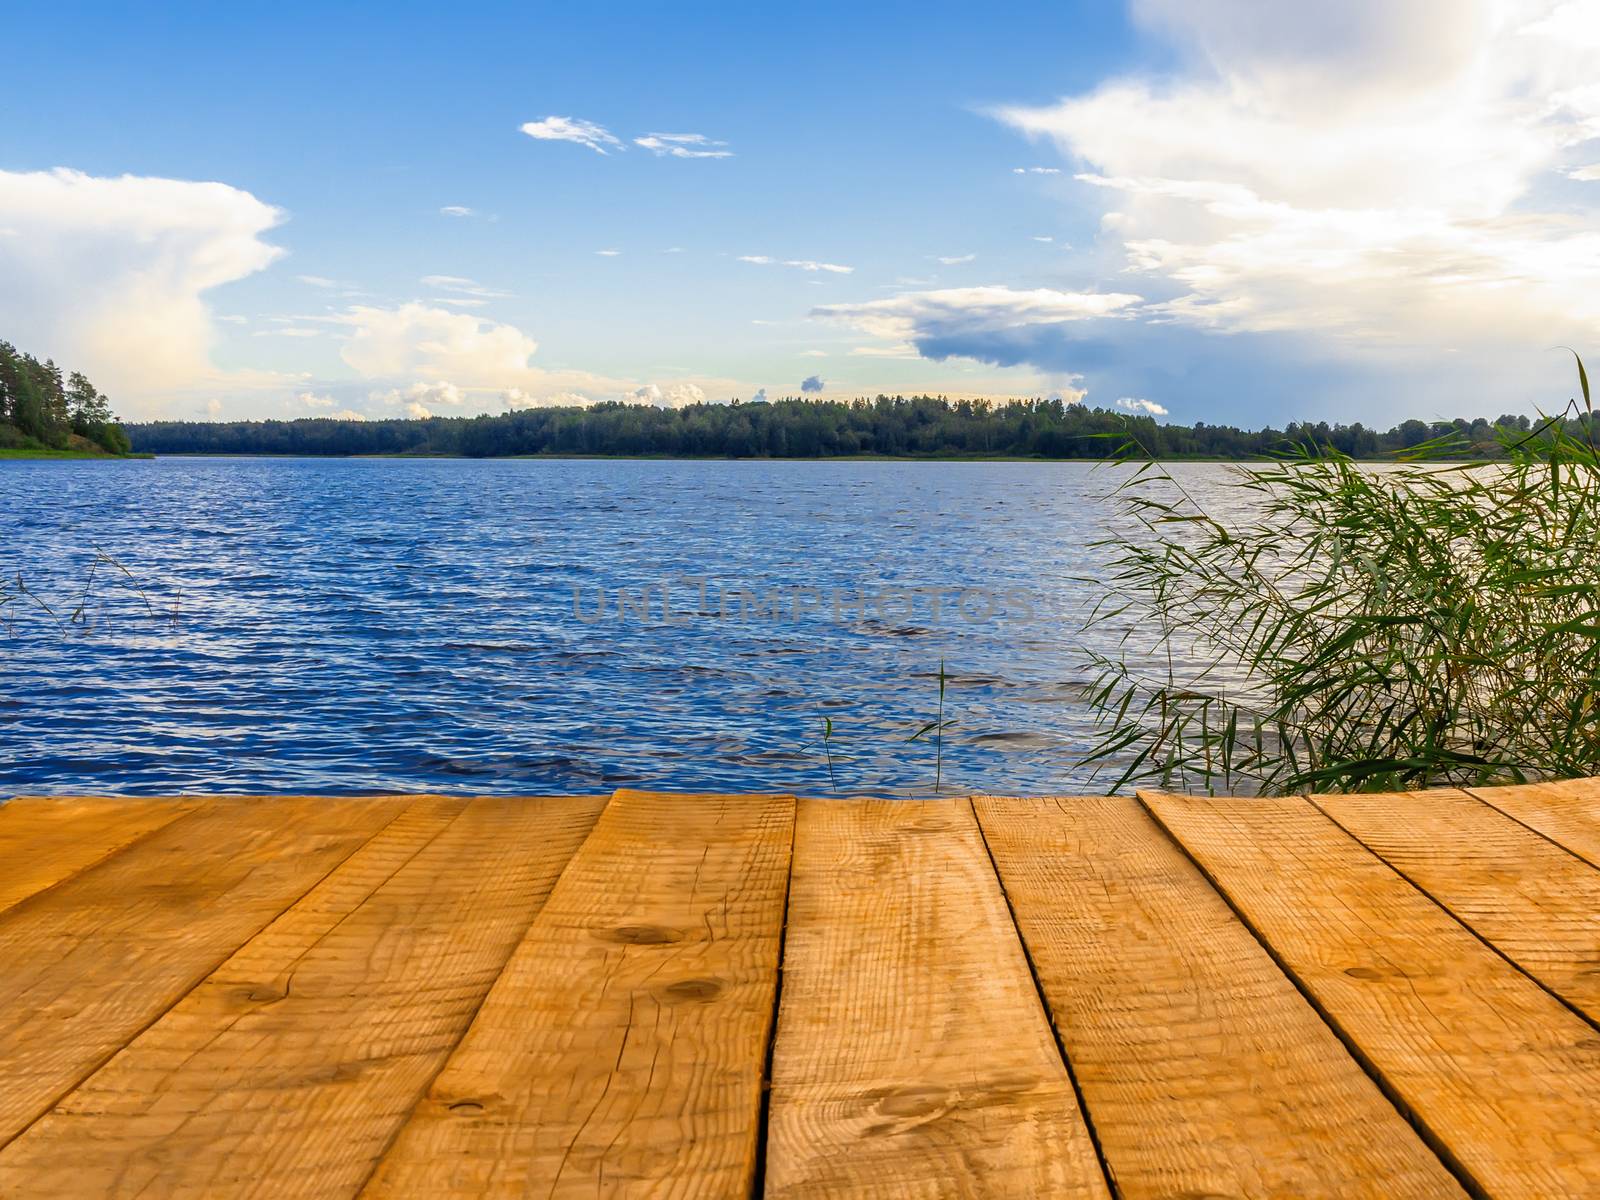 Empty wooden pier for swimming, boats or fishing on the lake by galsand